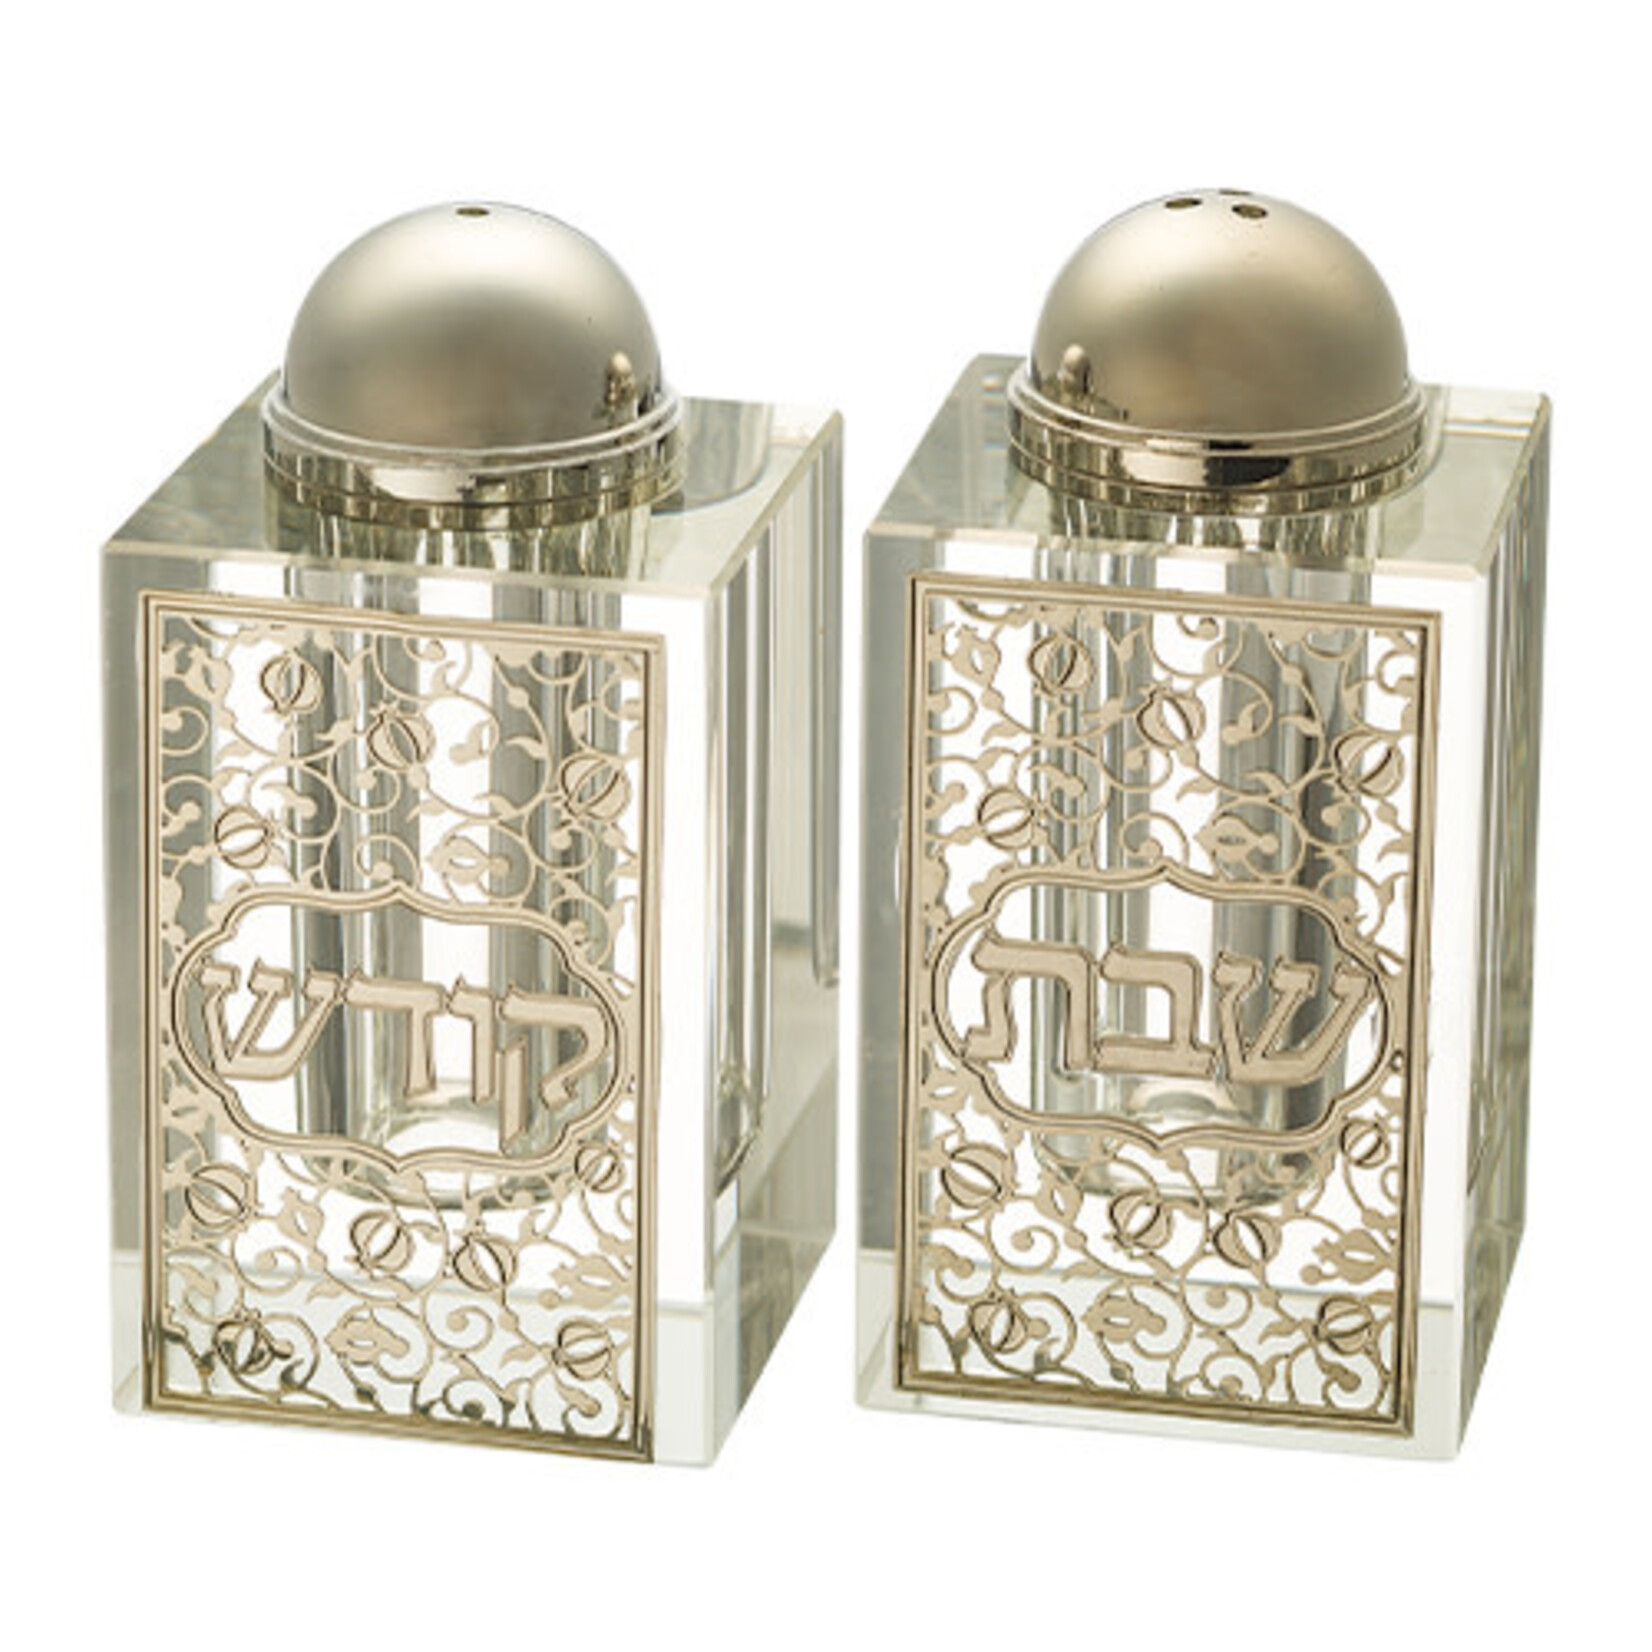 Crystal Salt and Pepper Shakers - Silver